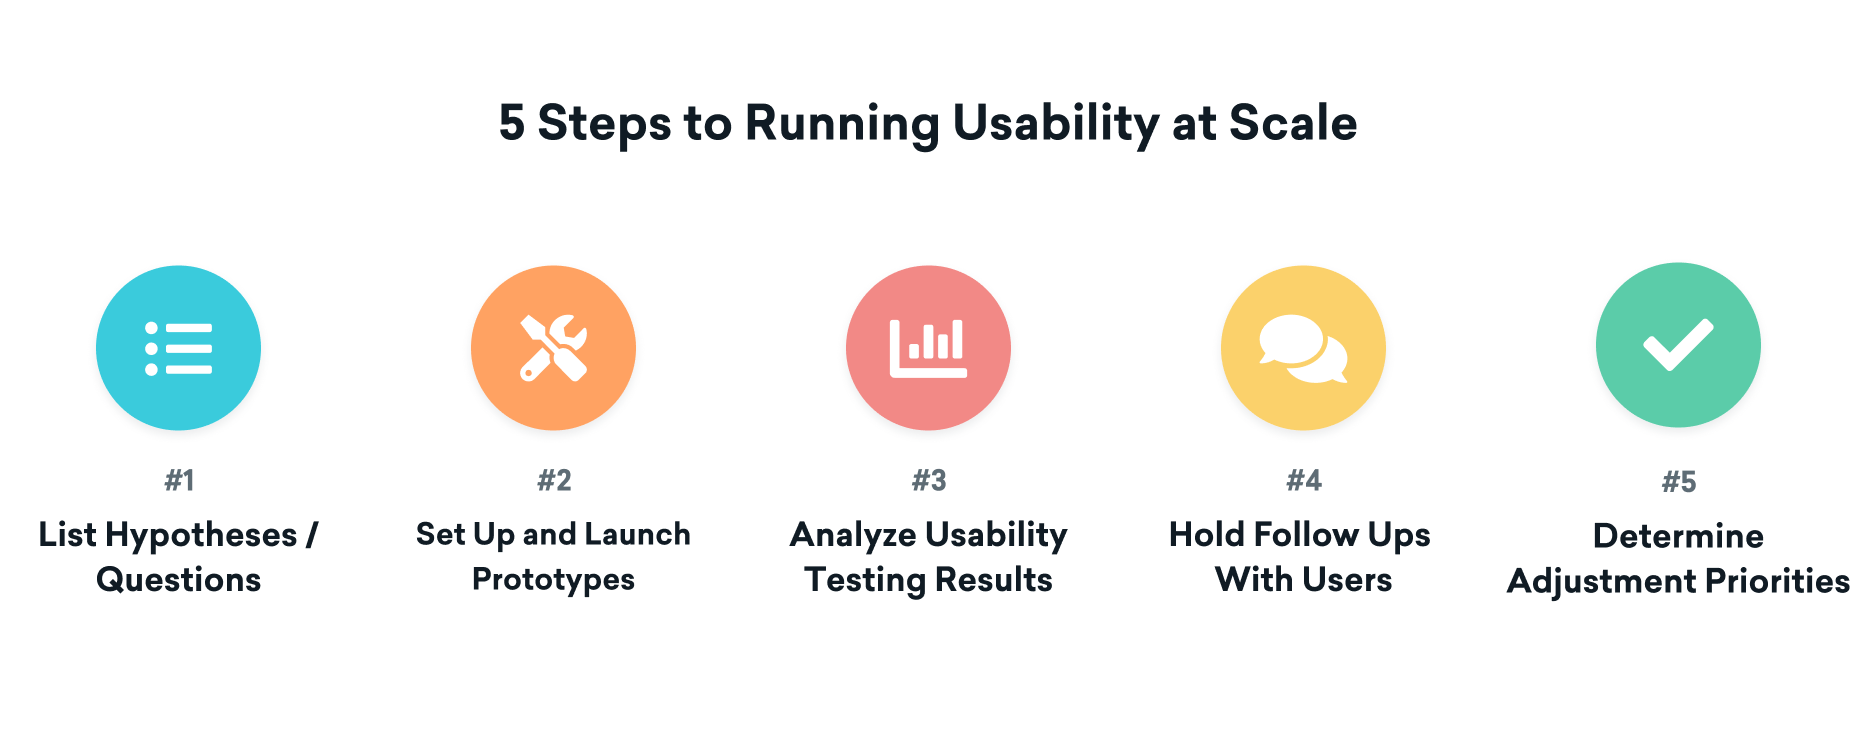 graphic - 5 steps for using usability at scale